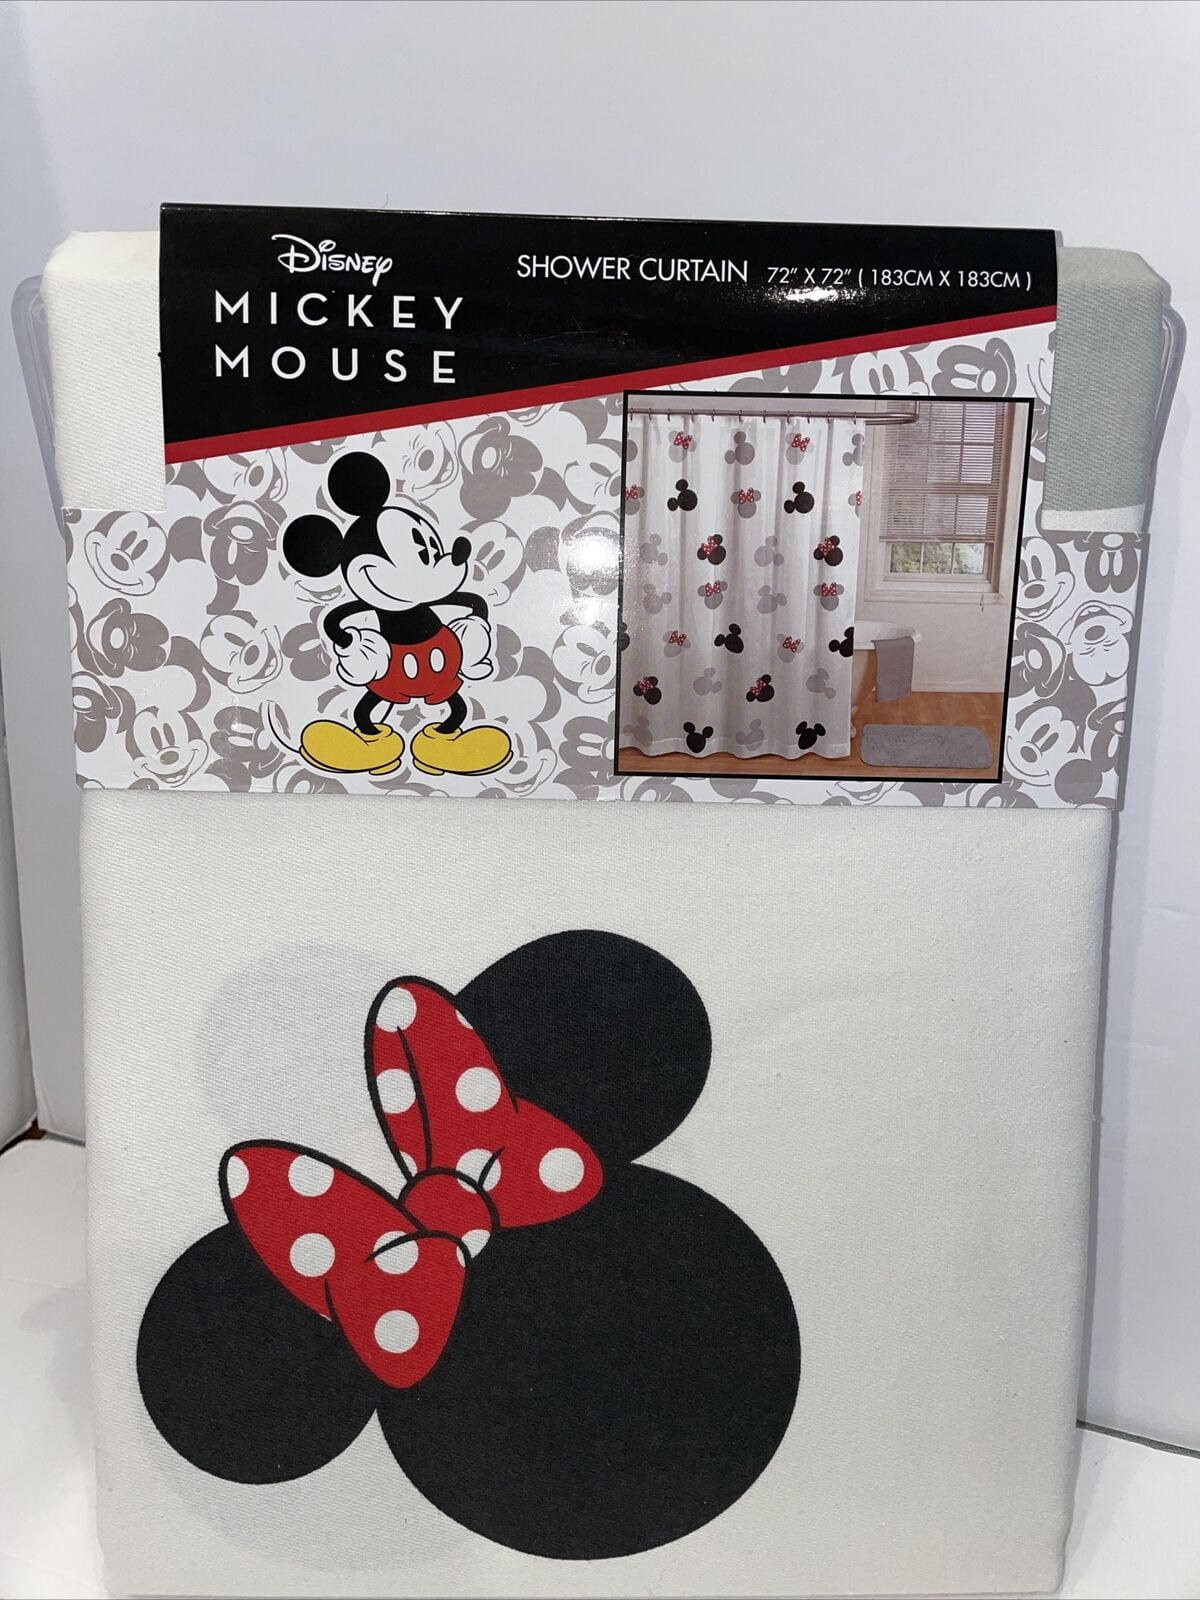 DISNEY MINNIE MOUSE FABRIC SHOWER CURTAIN 72 x 72 MICKEY MOUSE COLLECTION 